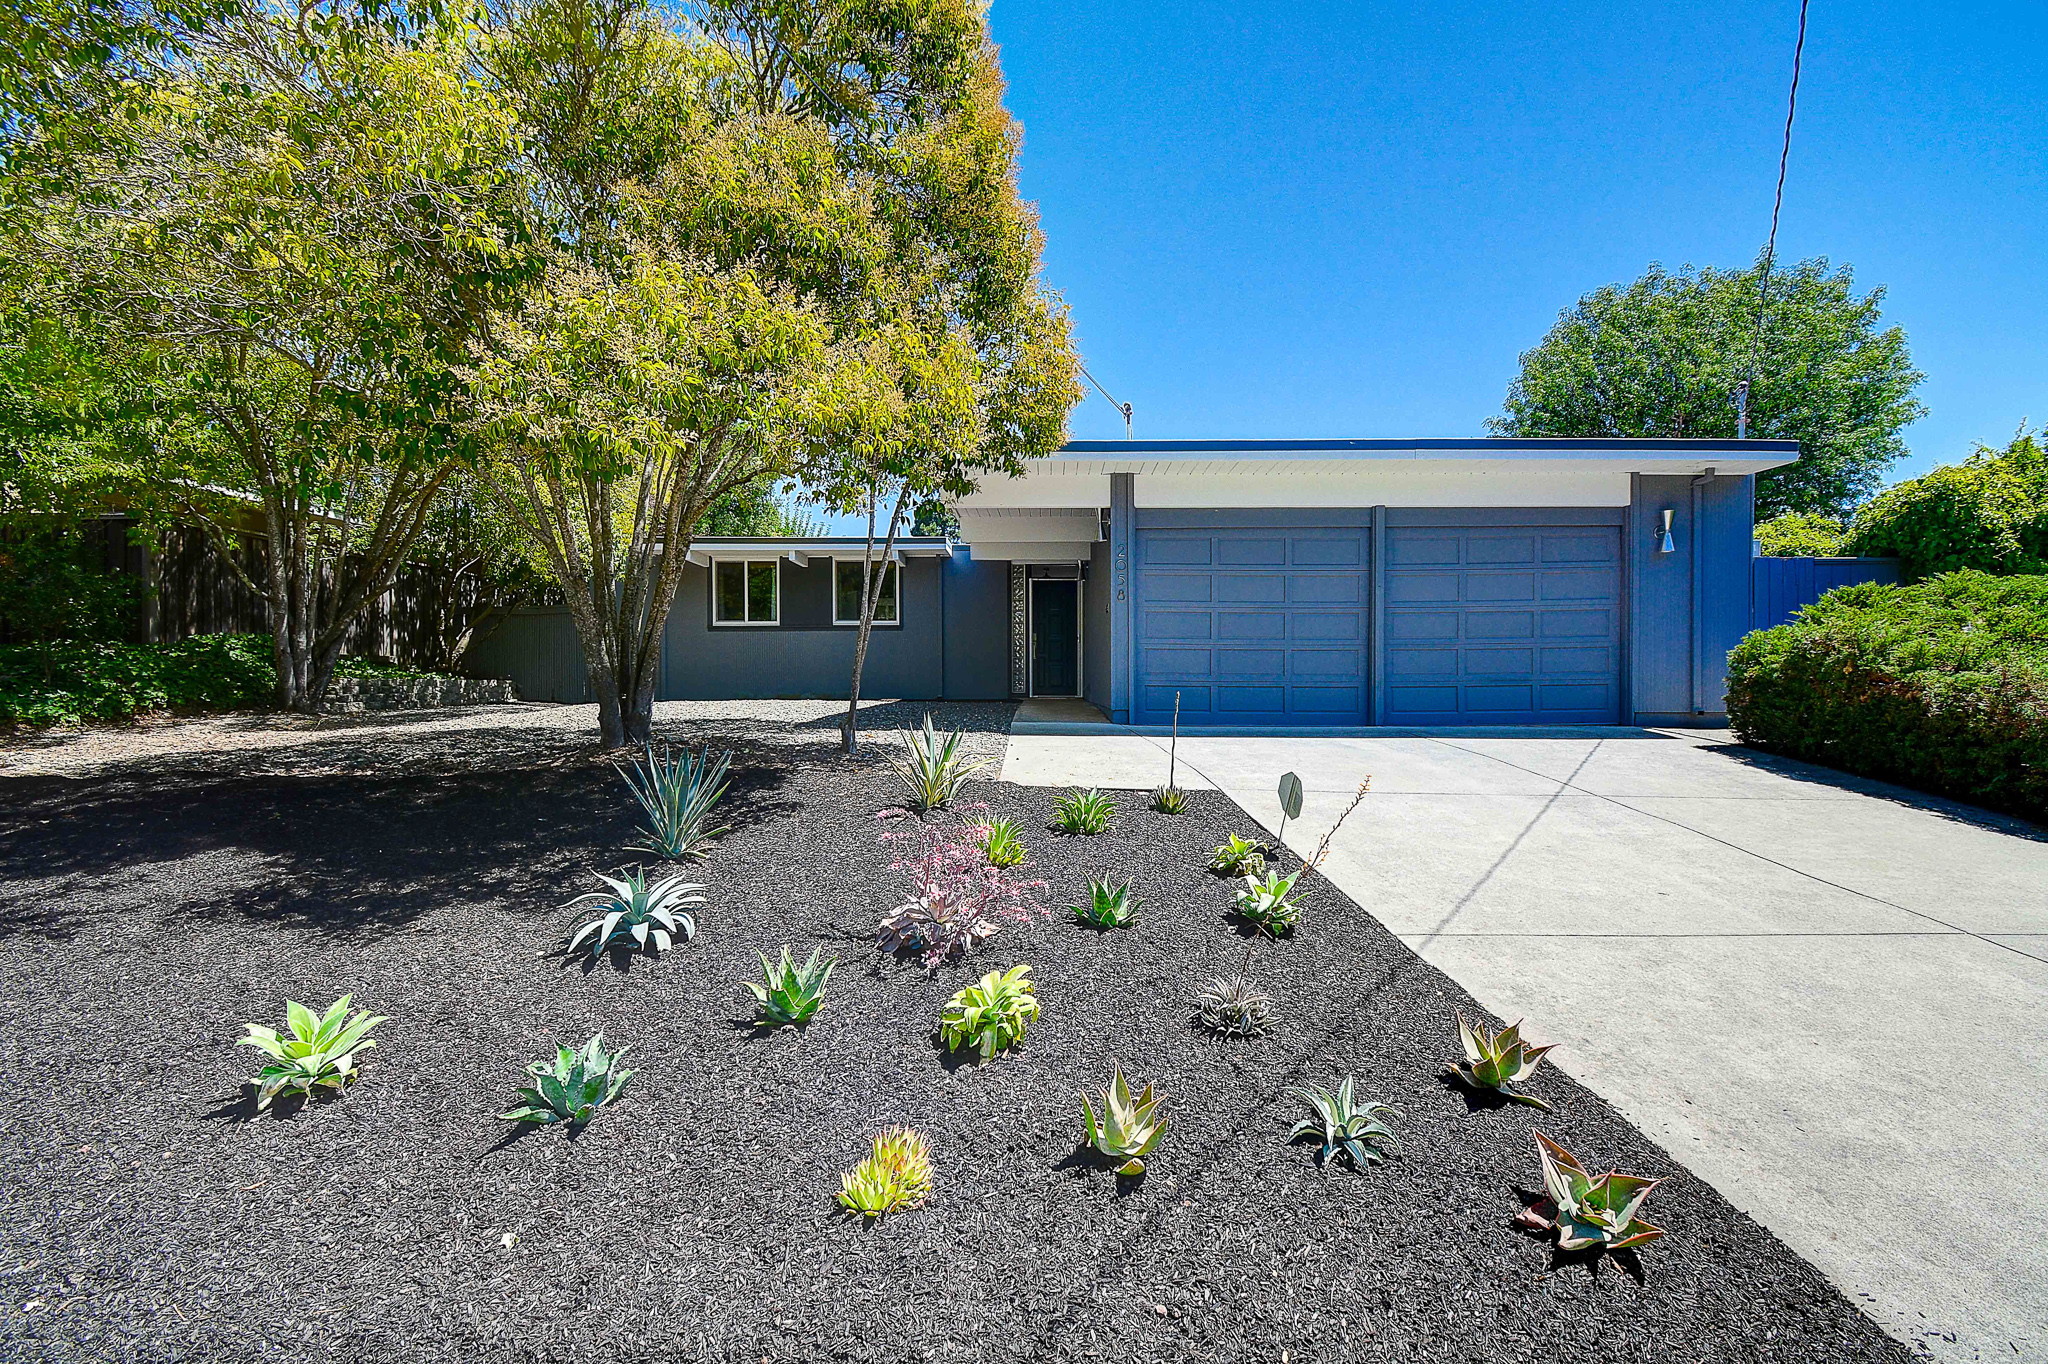 2058 Huckleberry Road-34San Rafael Real Estate - Listed by Team Own Marin County #1 Real Estate Team.jpg